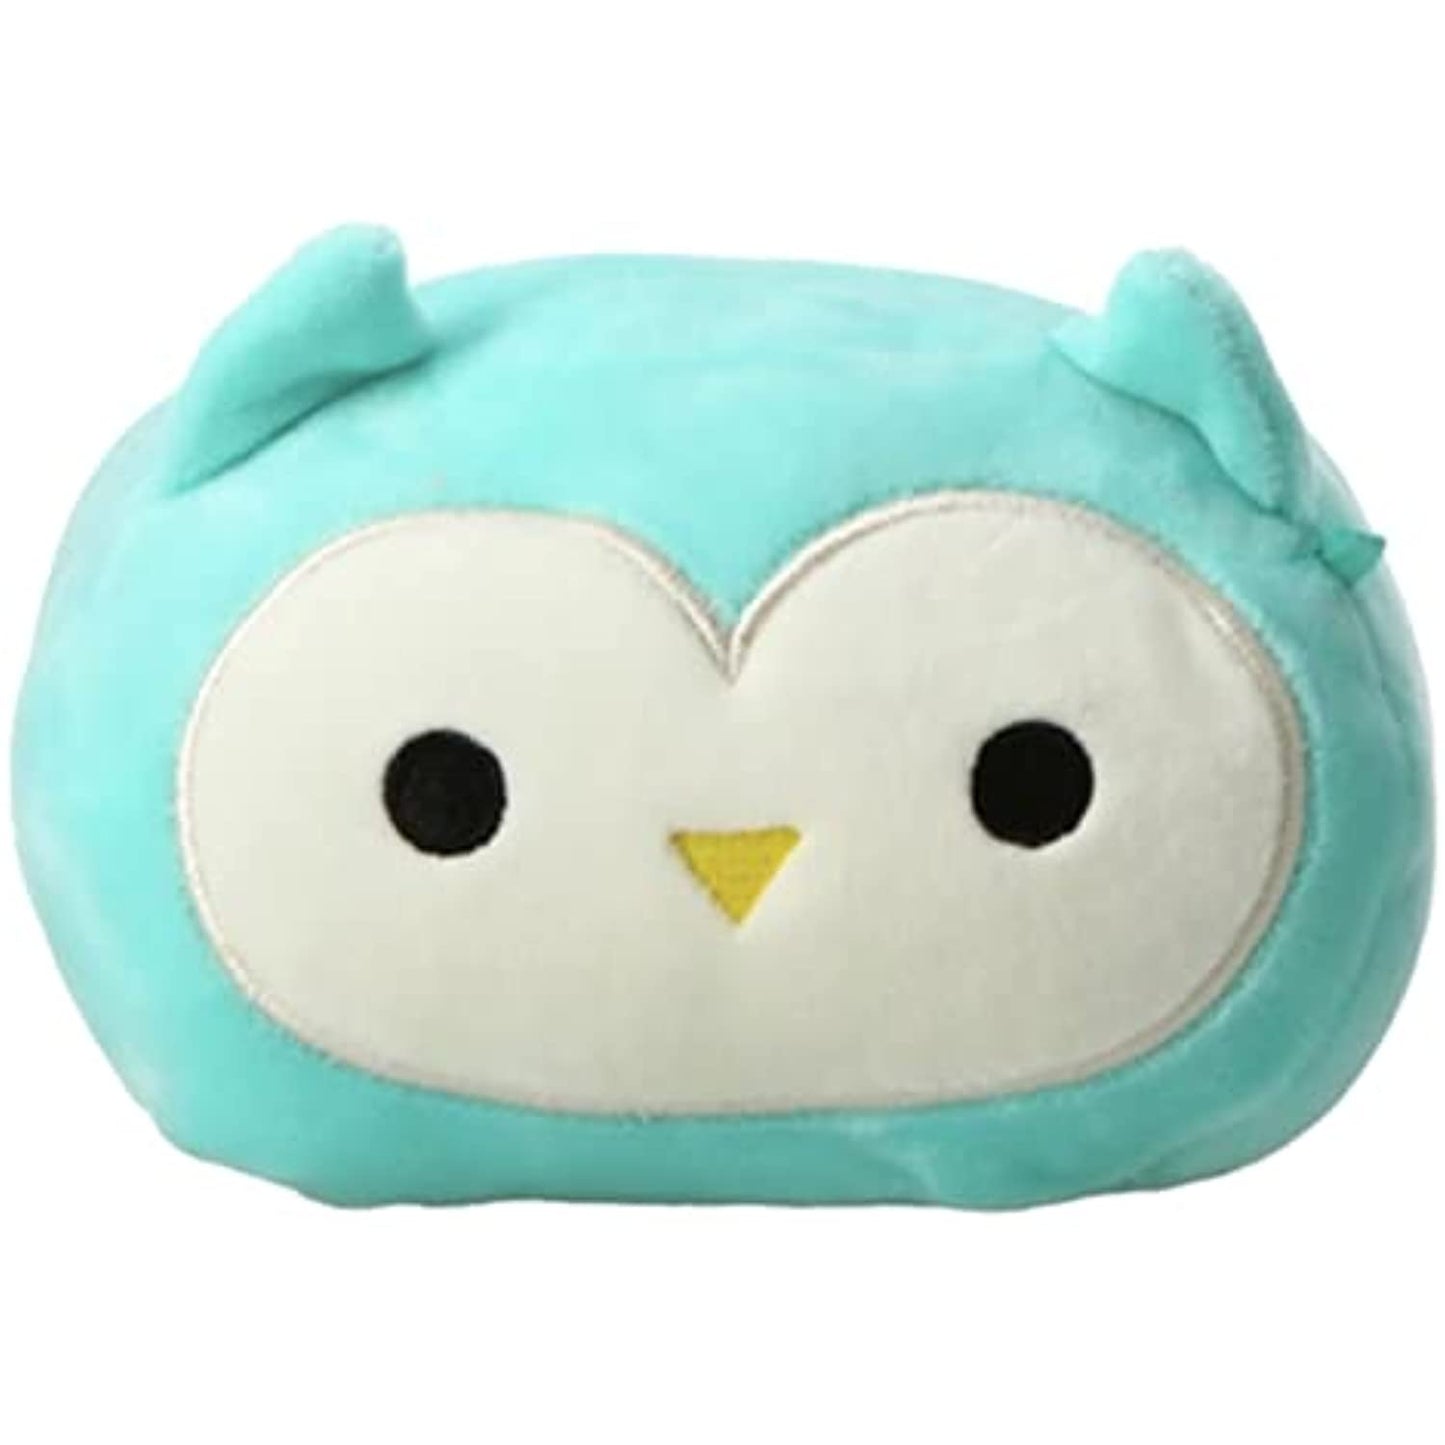 Squishmallows Winston the Owl 6" Stackable Plush Stuffed Animal